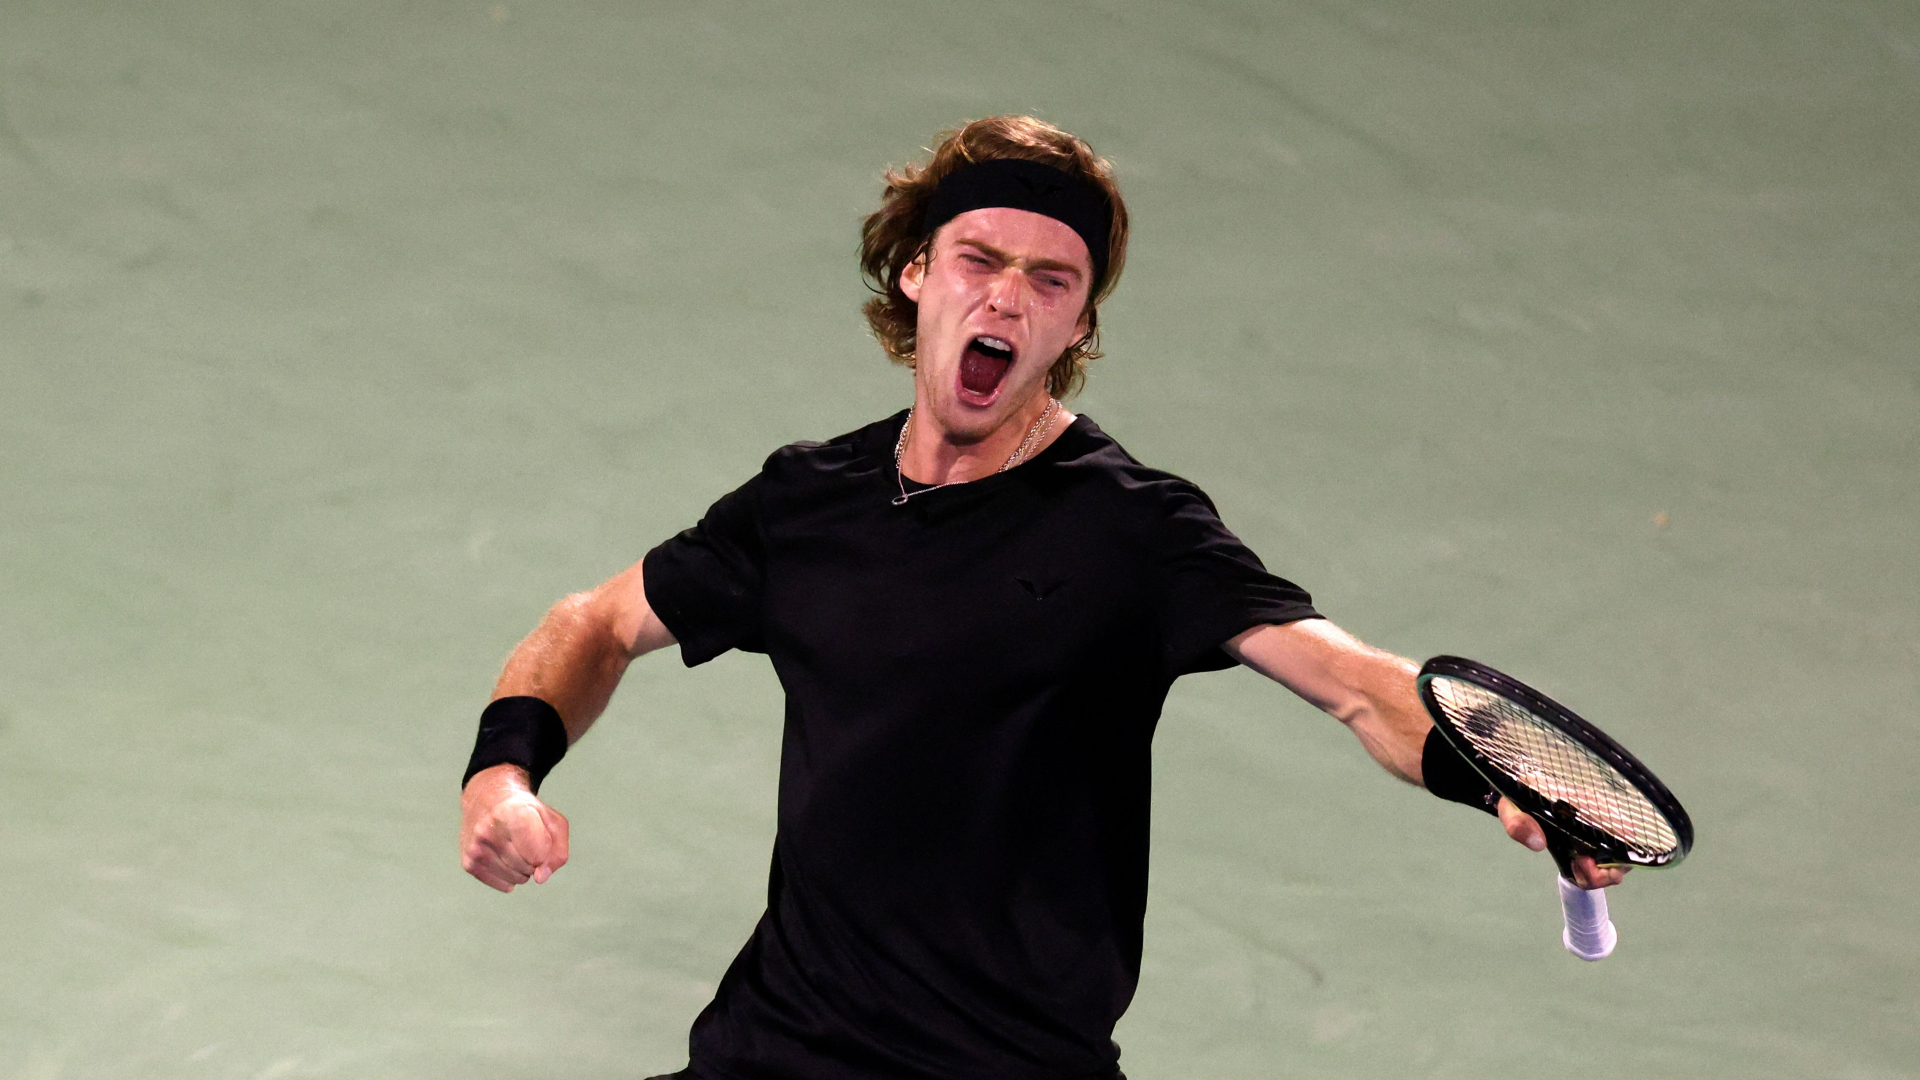 Rublev recovers from slow start to progress in beIN SPORTS